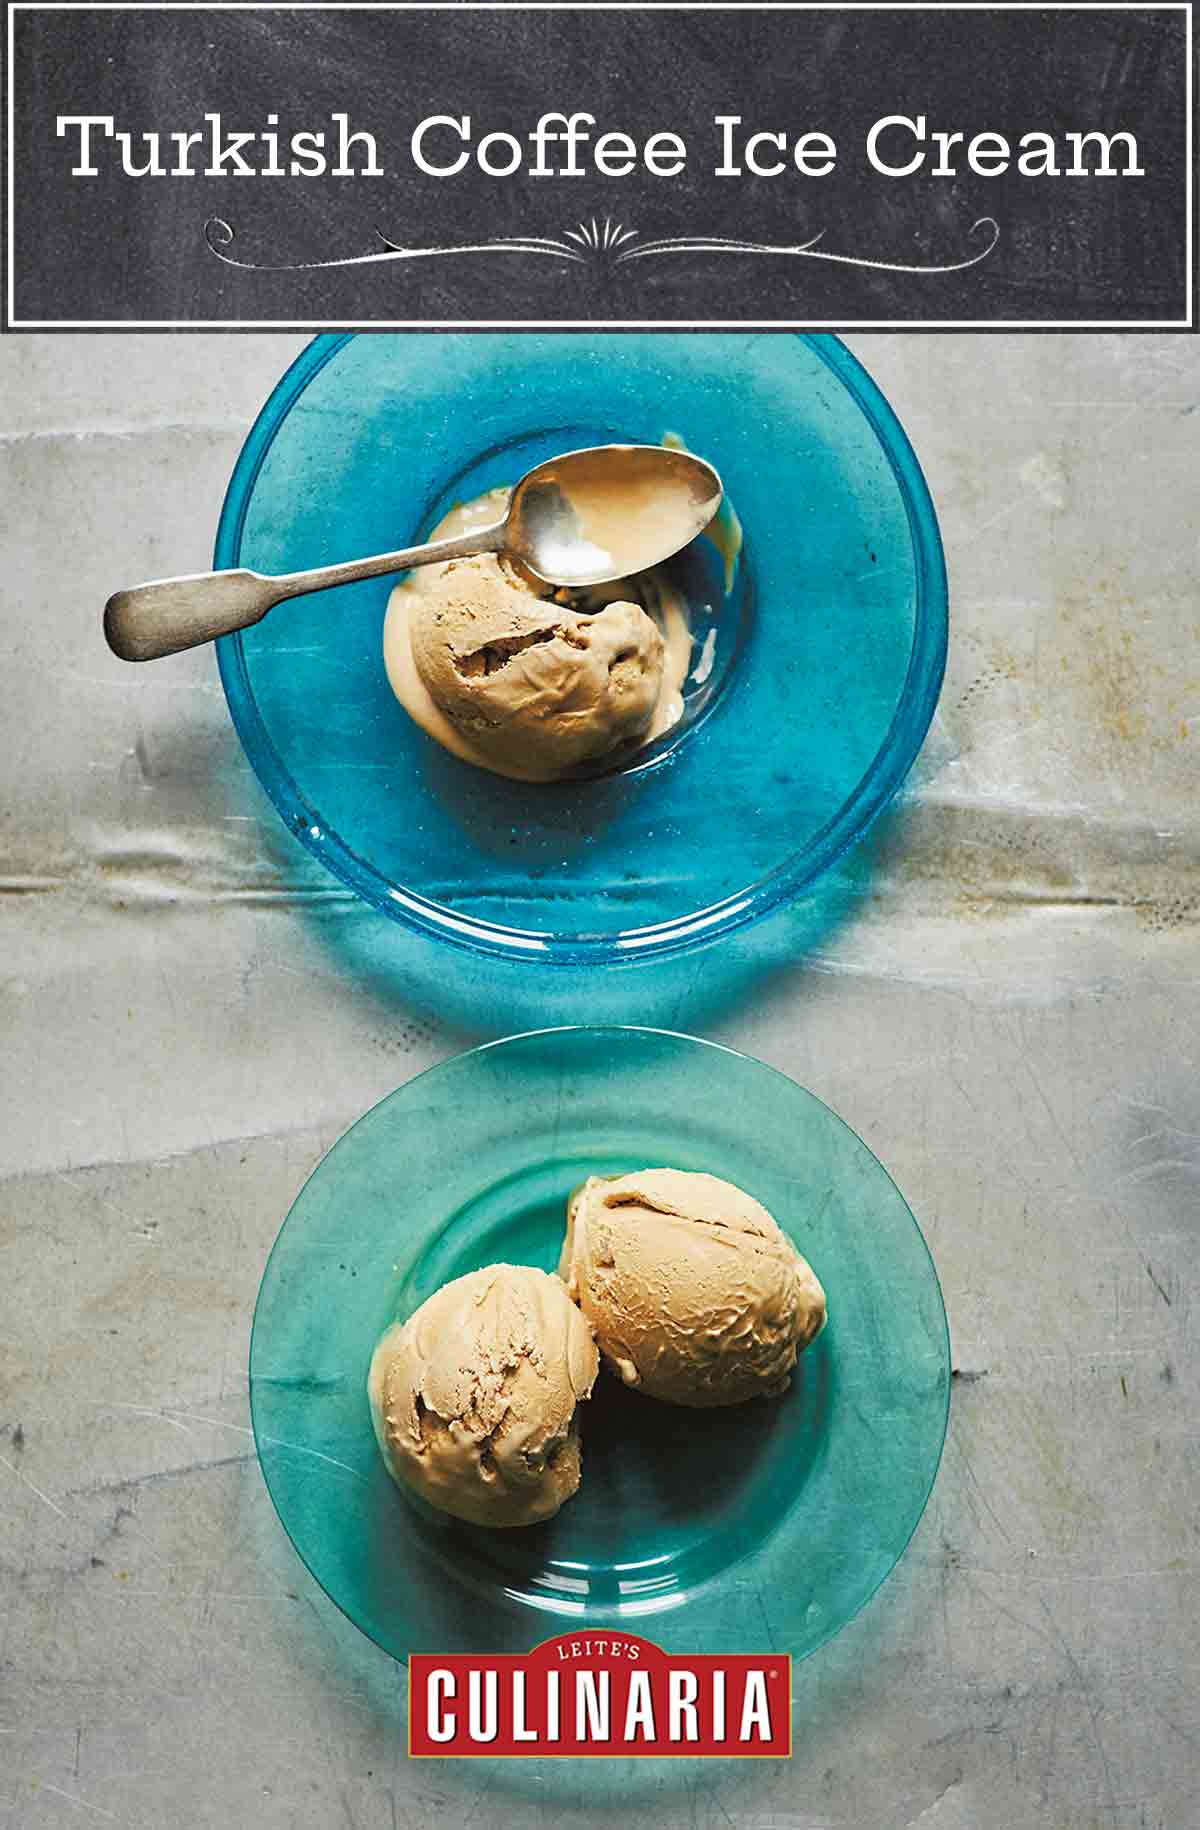 Two blue glass plates with scoops of Turkish coffee ice cream, and a spoon